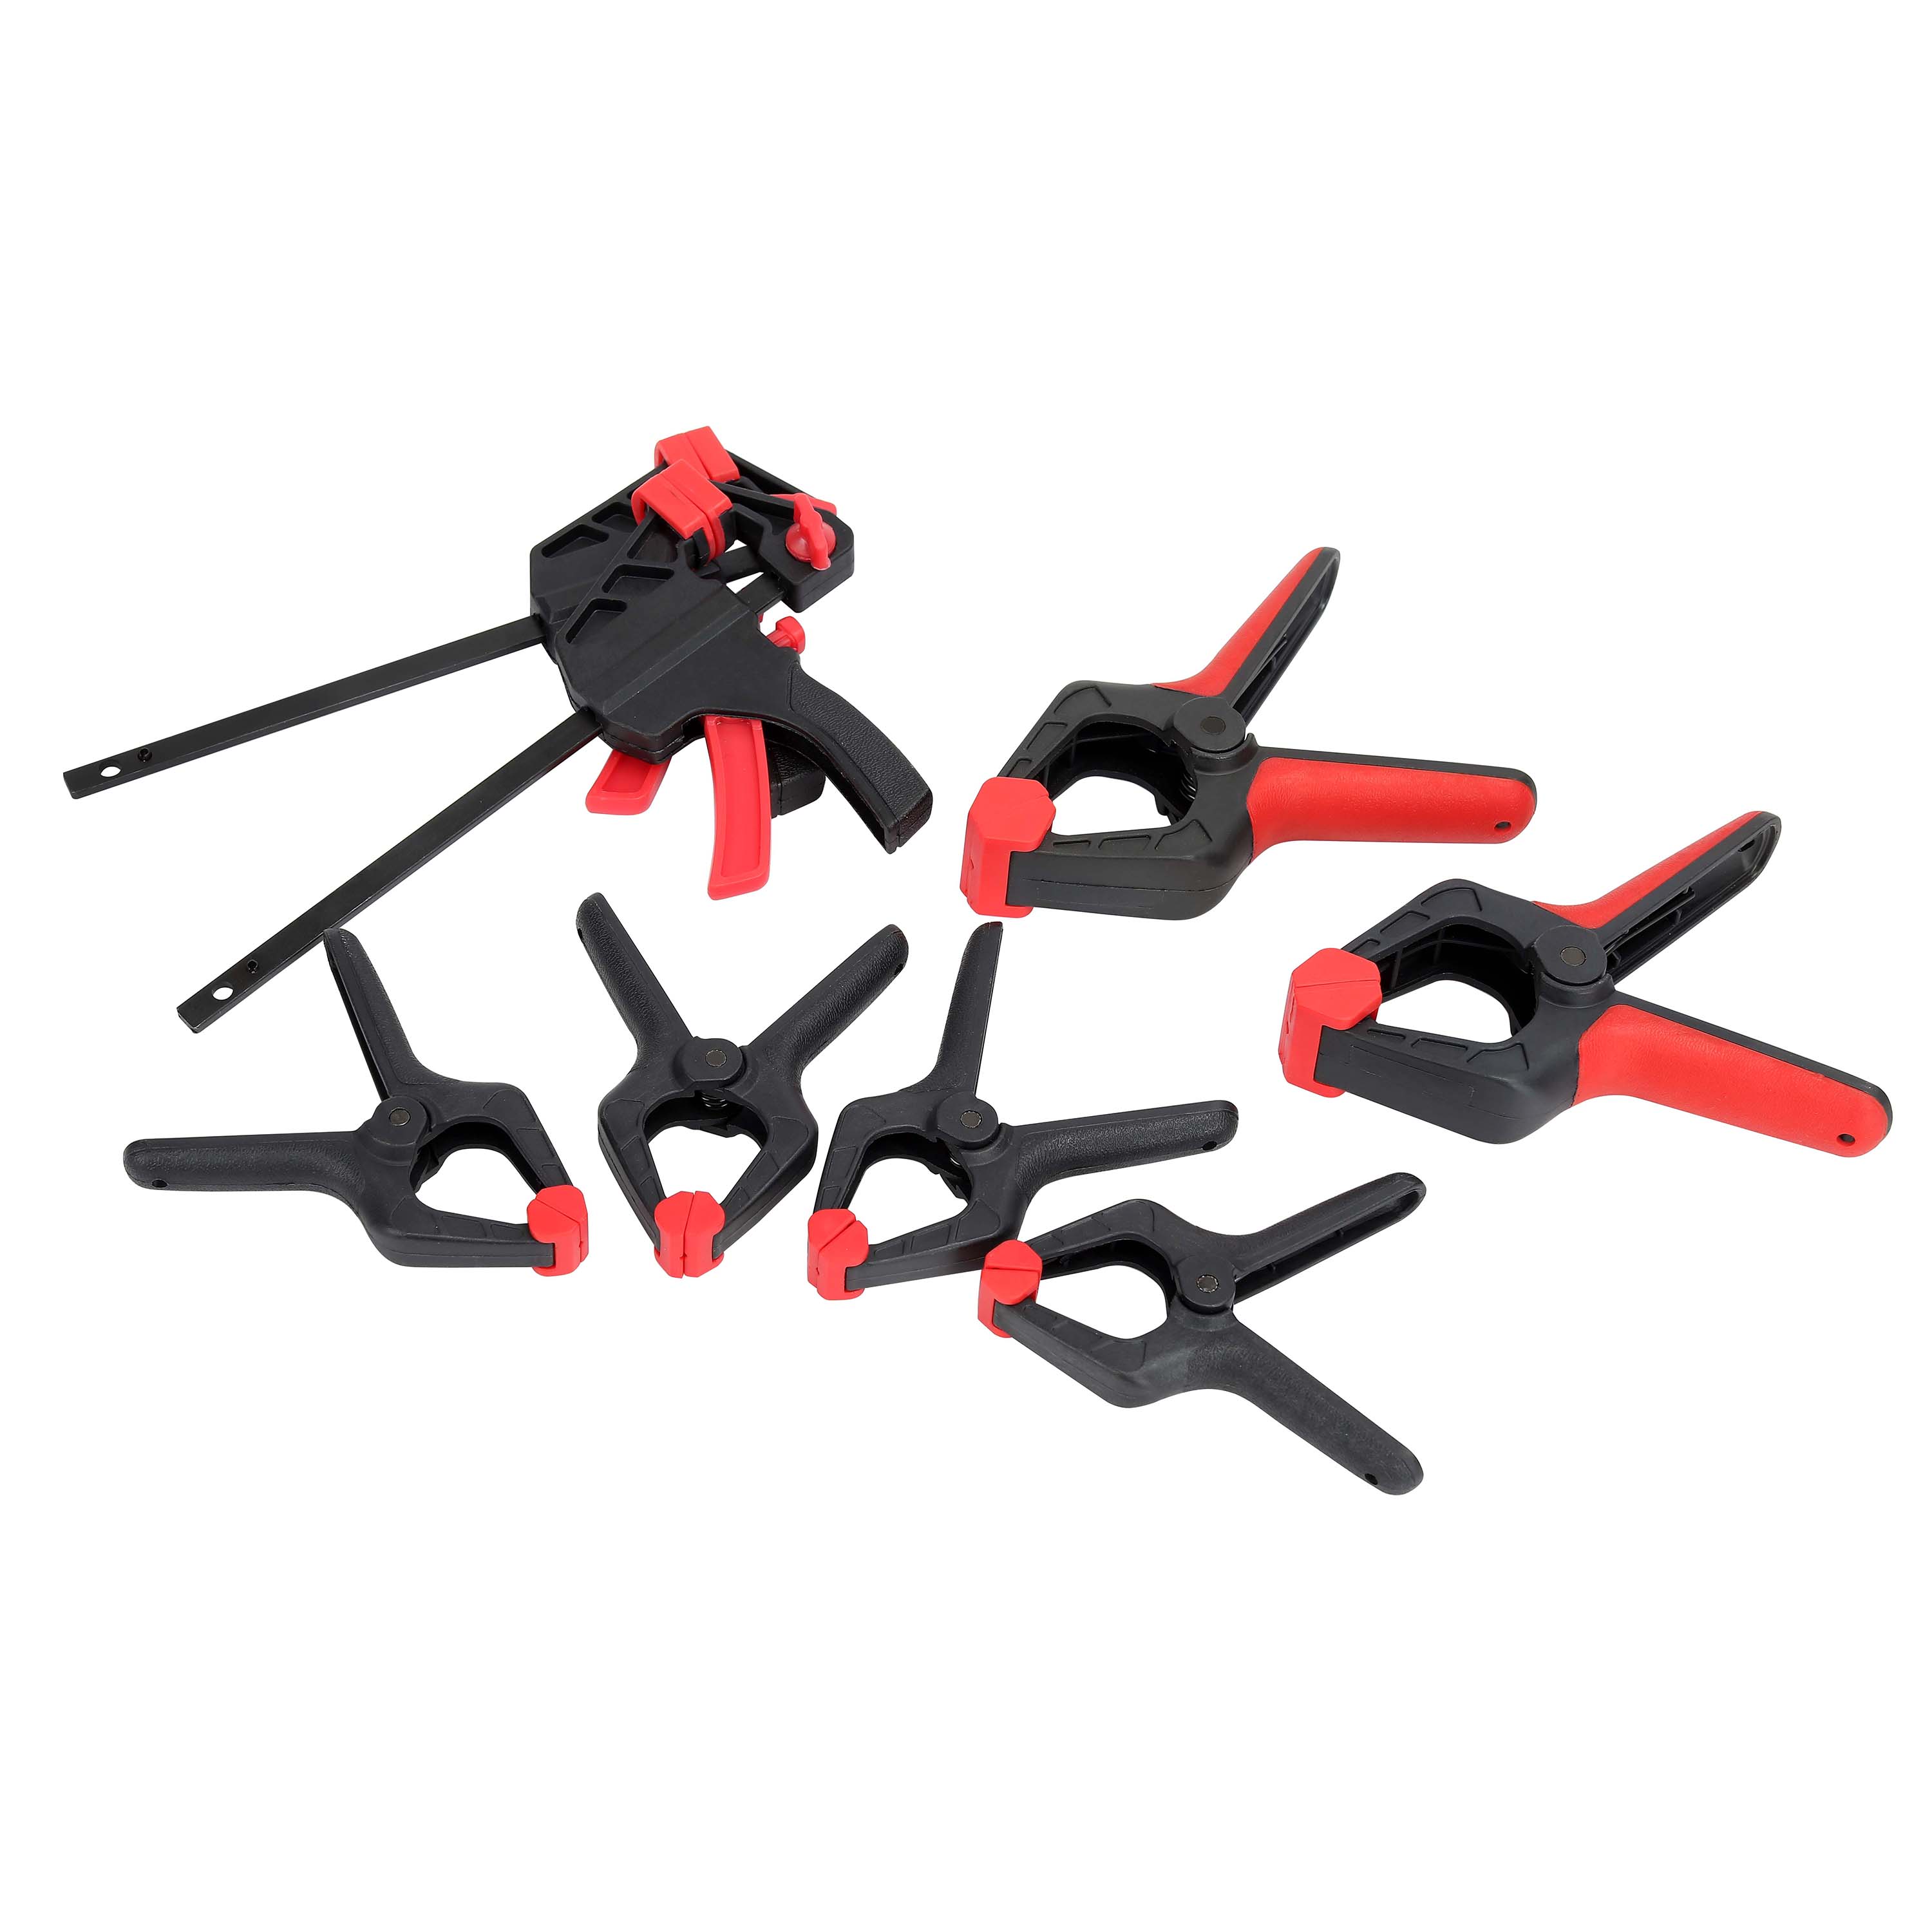 WORKPRO  8-Piece Hobby Clamp Set